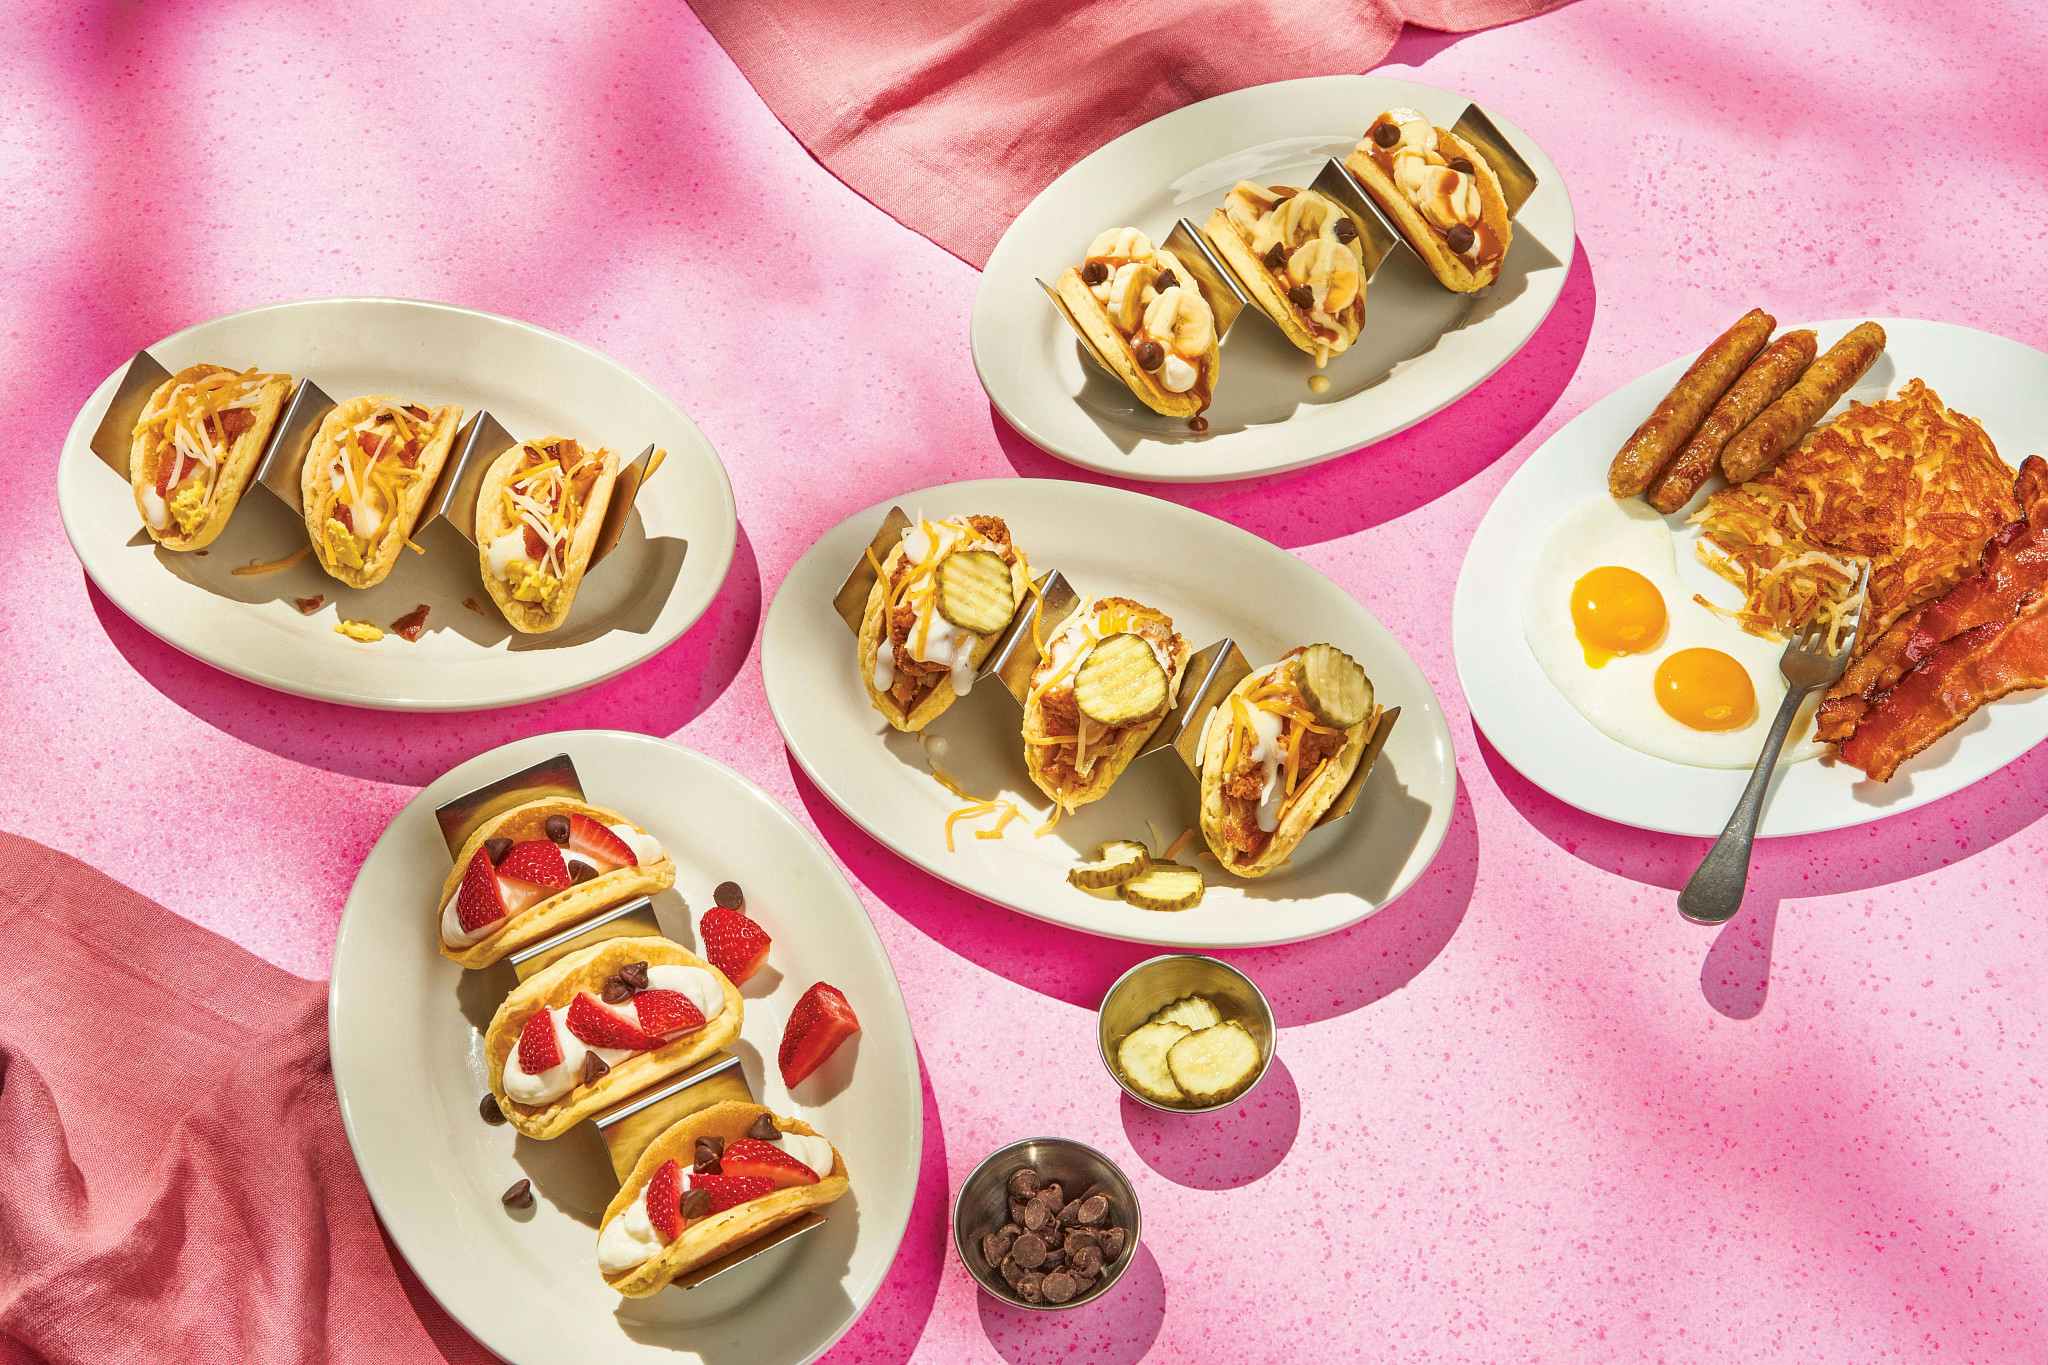 ihop pancake tacos next to a combo of eggs, bacon, and hashbrown on a pink background